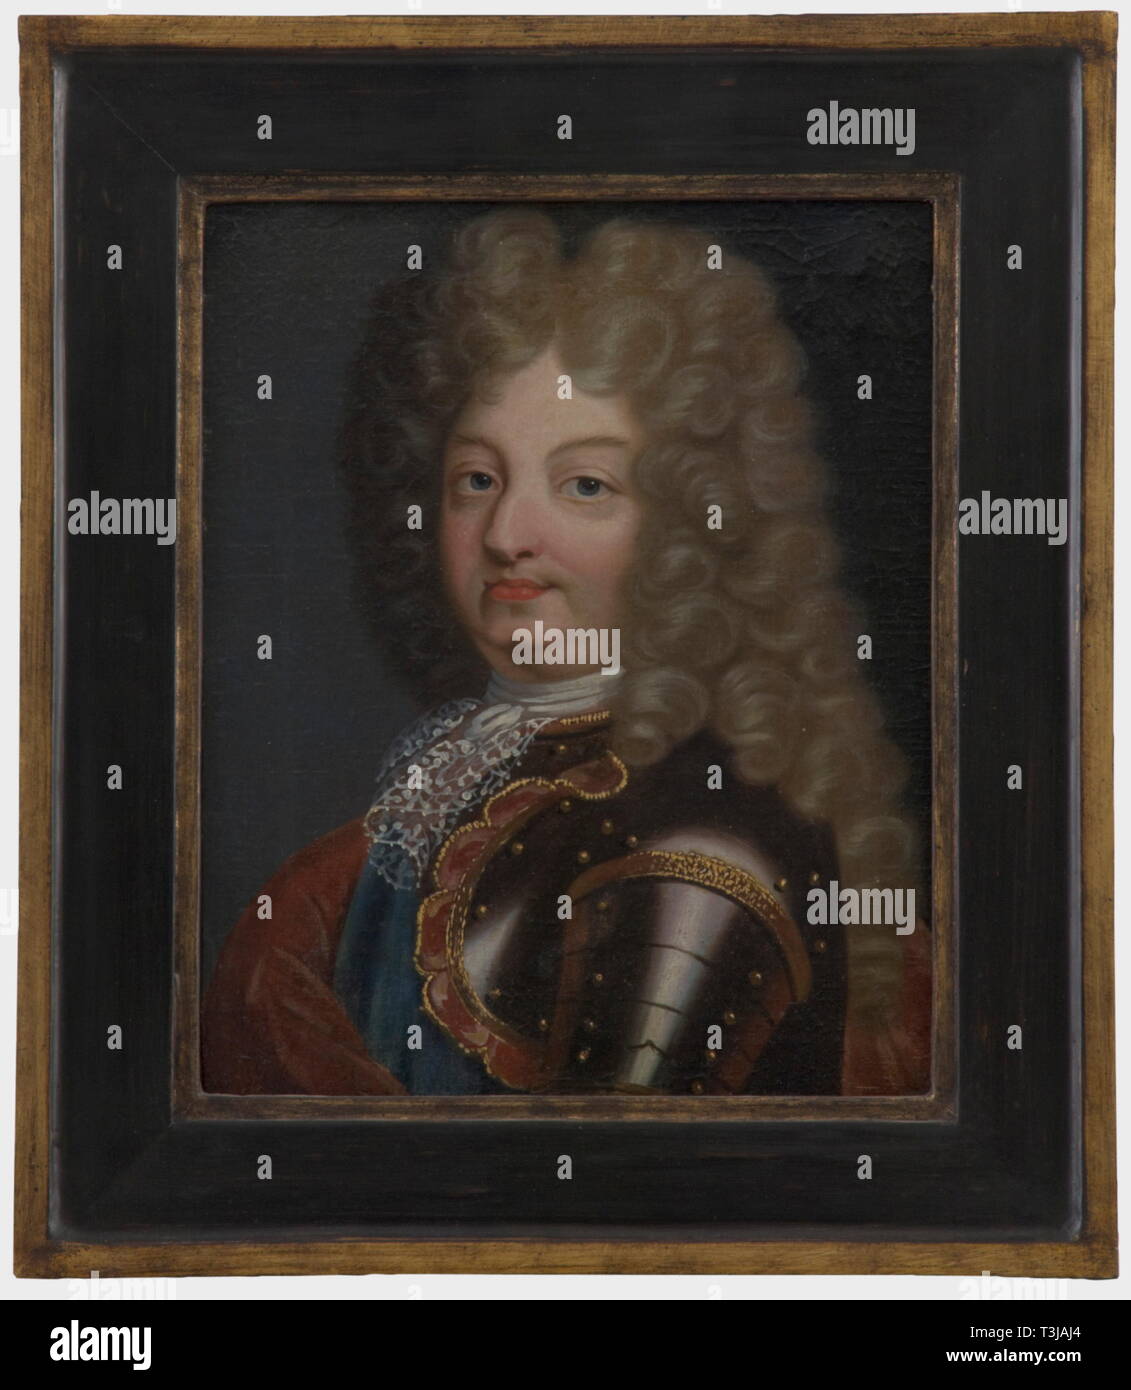 A Portrait of a sovereign, England, France(?), late 17th century Portrait of a nobleman in black armour with blue sash (English Order of the Garter or French Order of the Holy Spirit). Hairstyle of the late 17th century. Oil on canvas, size 30.5 x 37 cm, in modern frame. fine arts, people, 17th century, fine arts, art, painting, paintings, object, objects, stills, clipping, clippings, cut out, cut-out, cut-outs, man, men, male, Artist's Copyright has not to be cleared Stock Photo